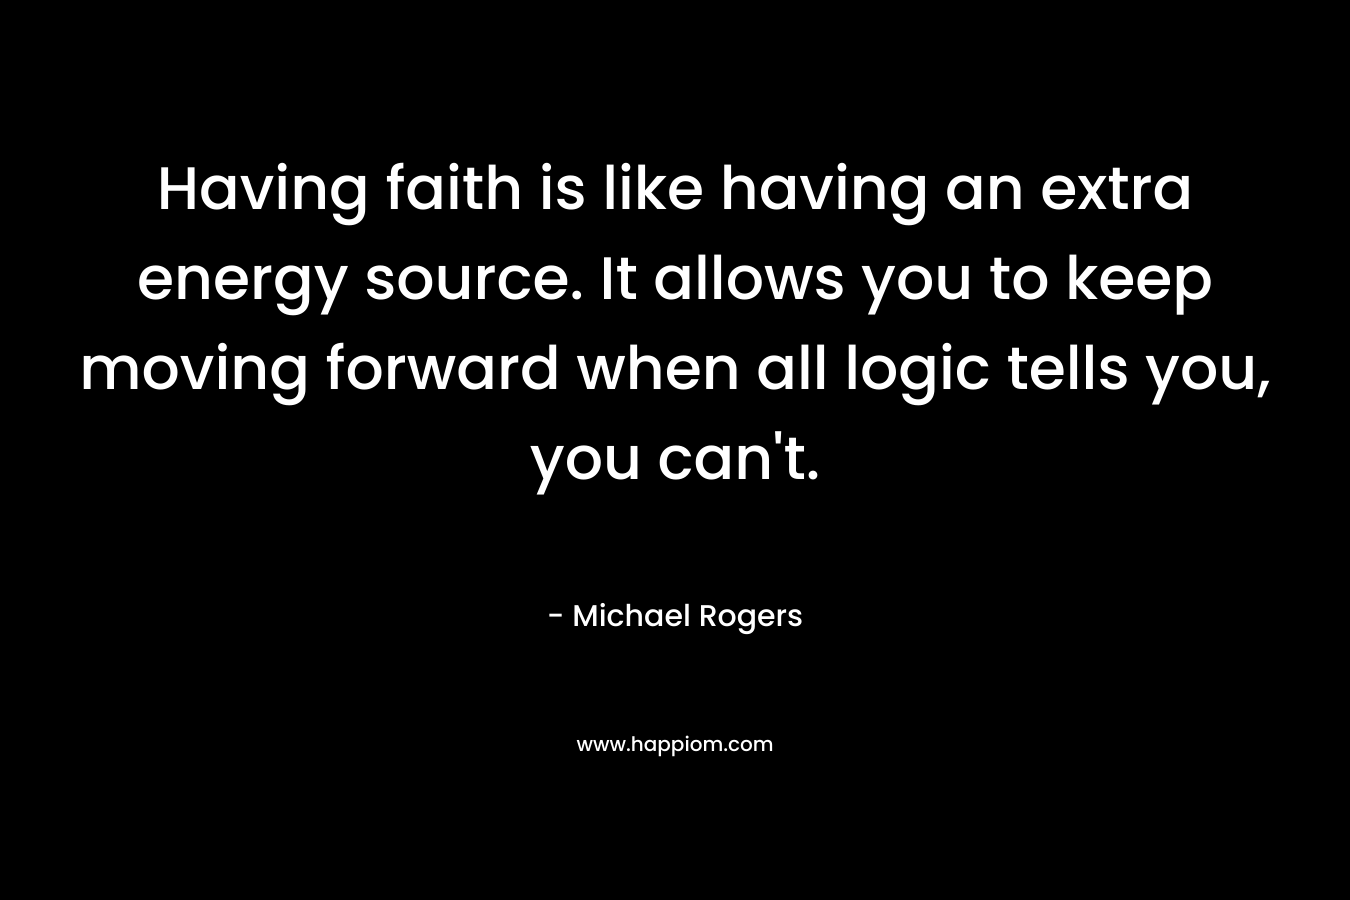 Having faith is like having an extra energy source. It allows you to keep moving forward when all logic tells you, you can’t. – Michael Rogers